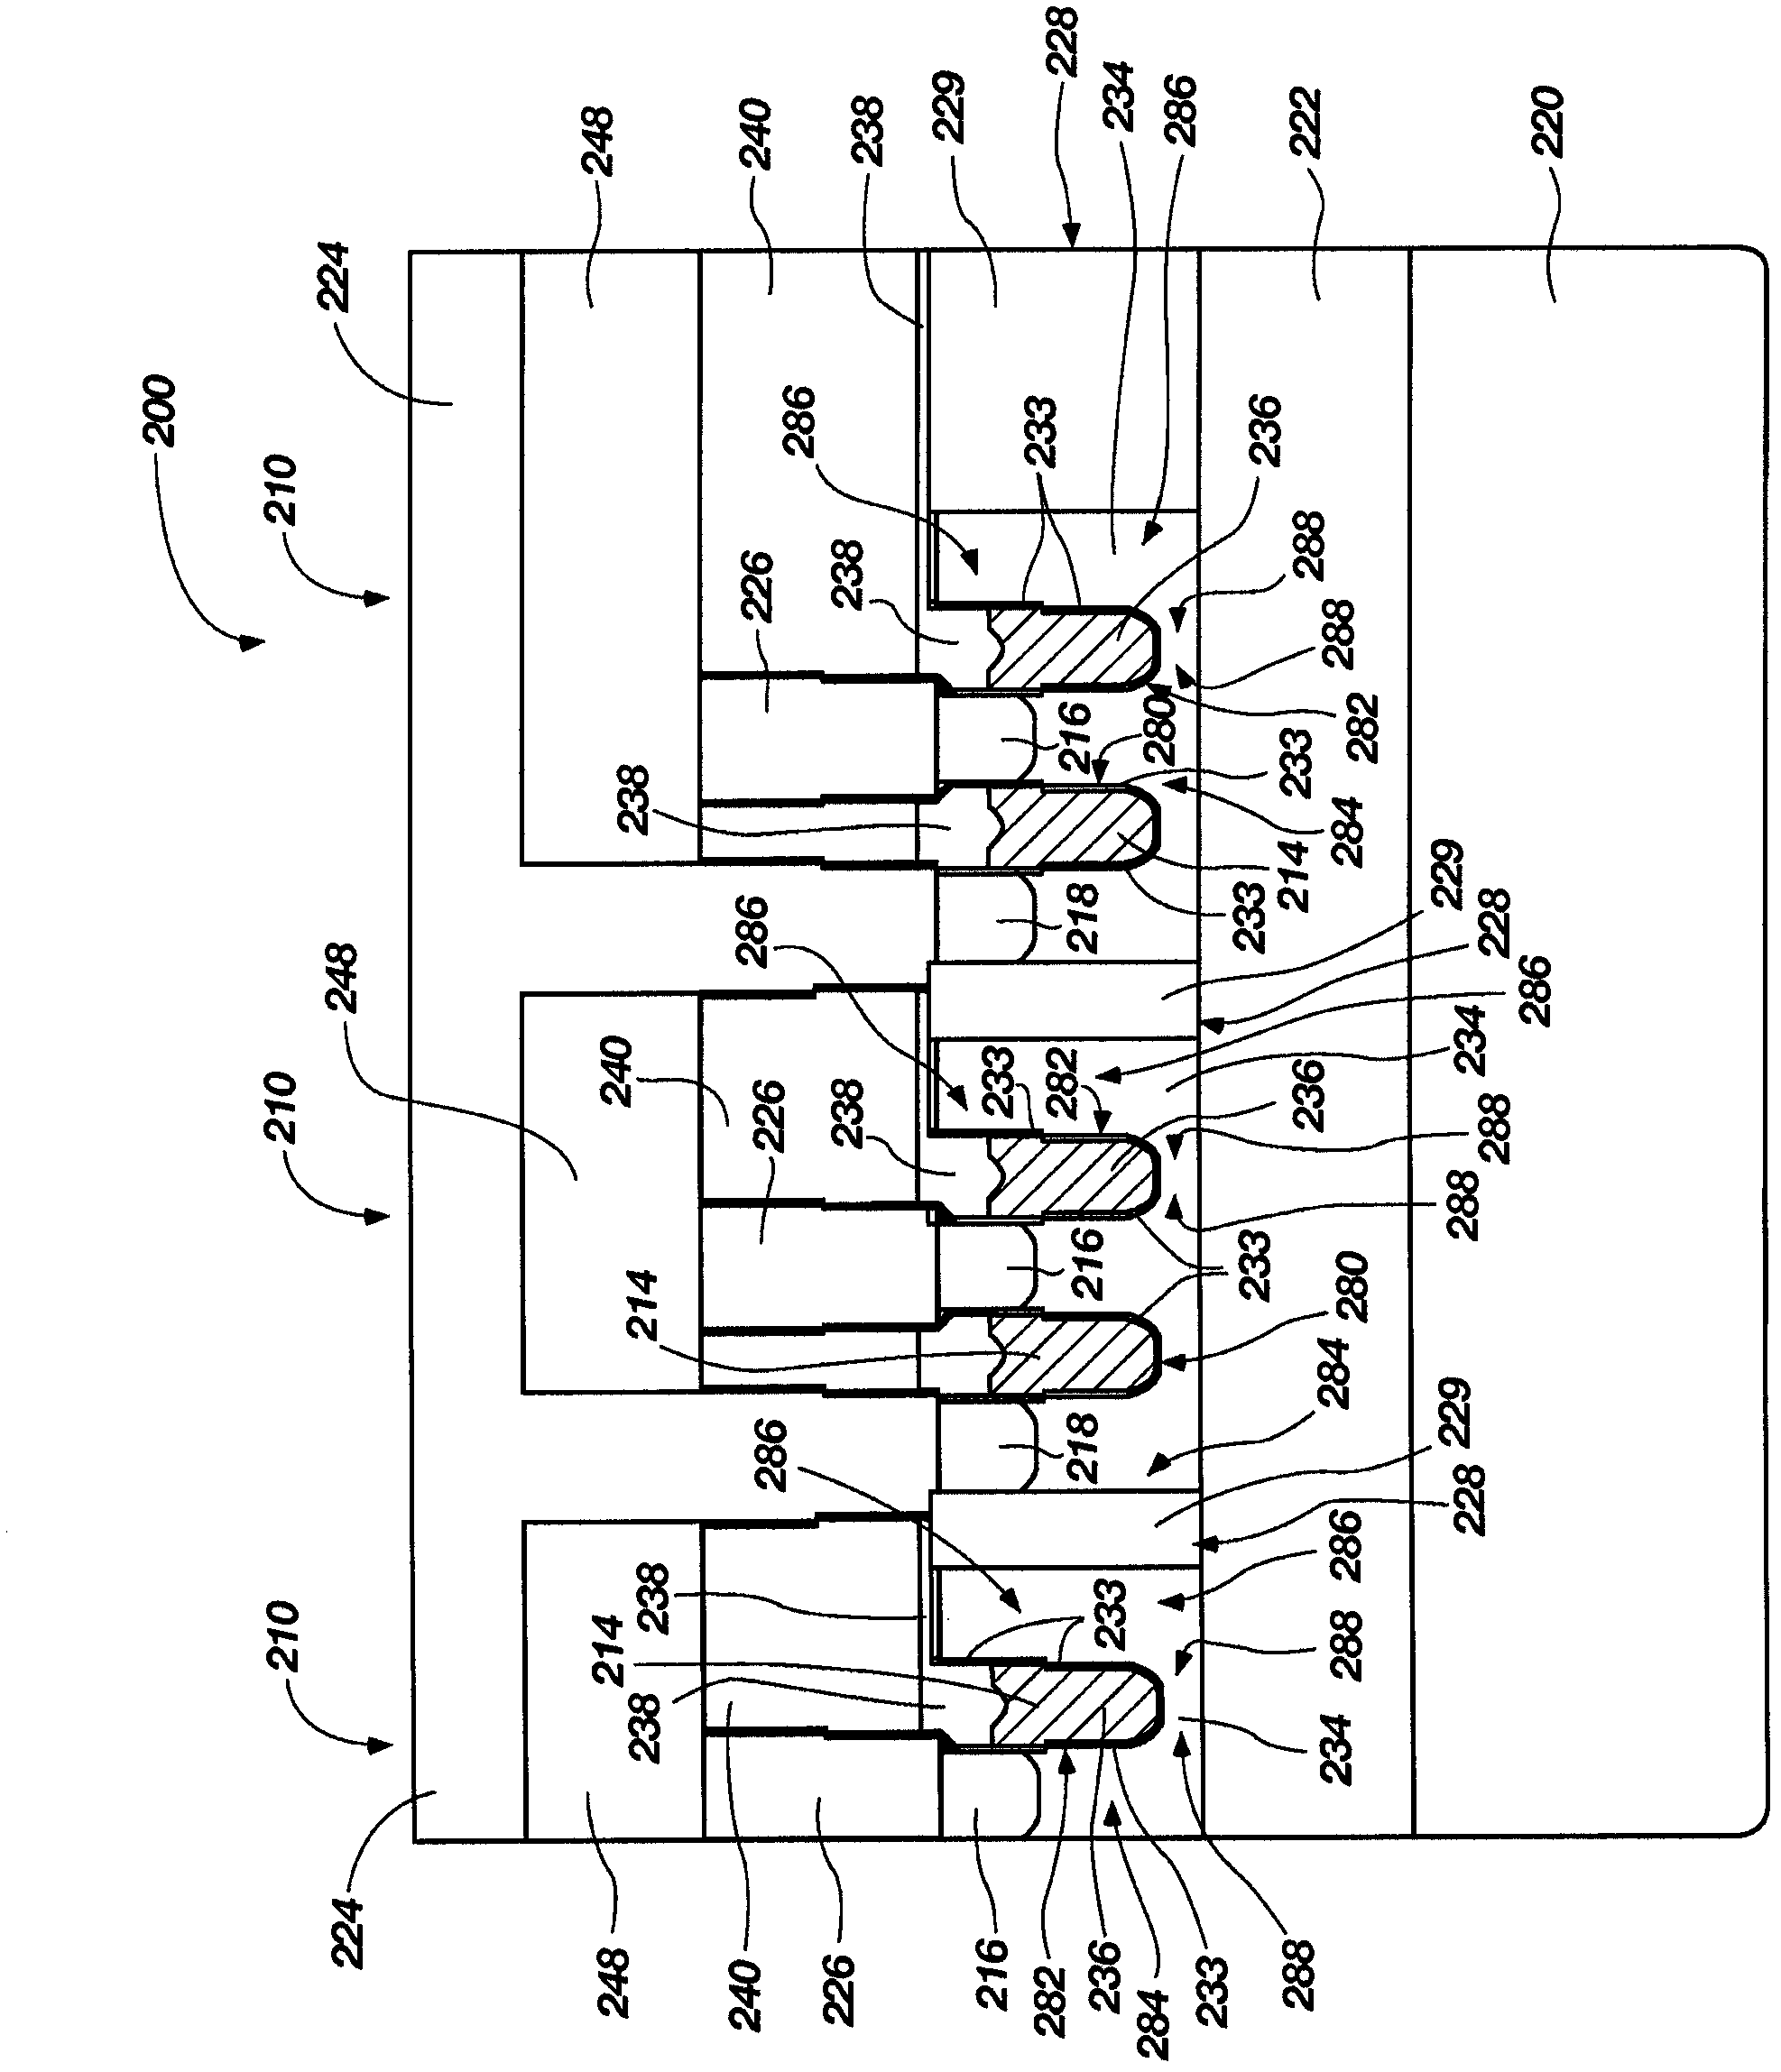 Methods, devices, and systems relating to memory cells having a floating body